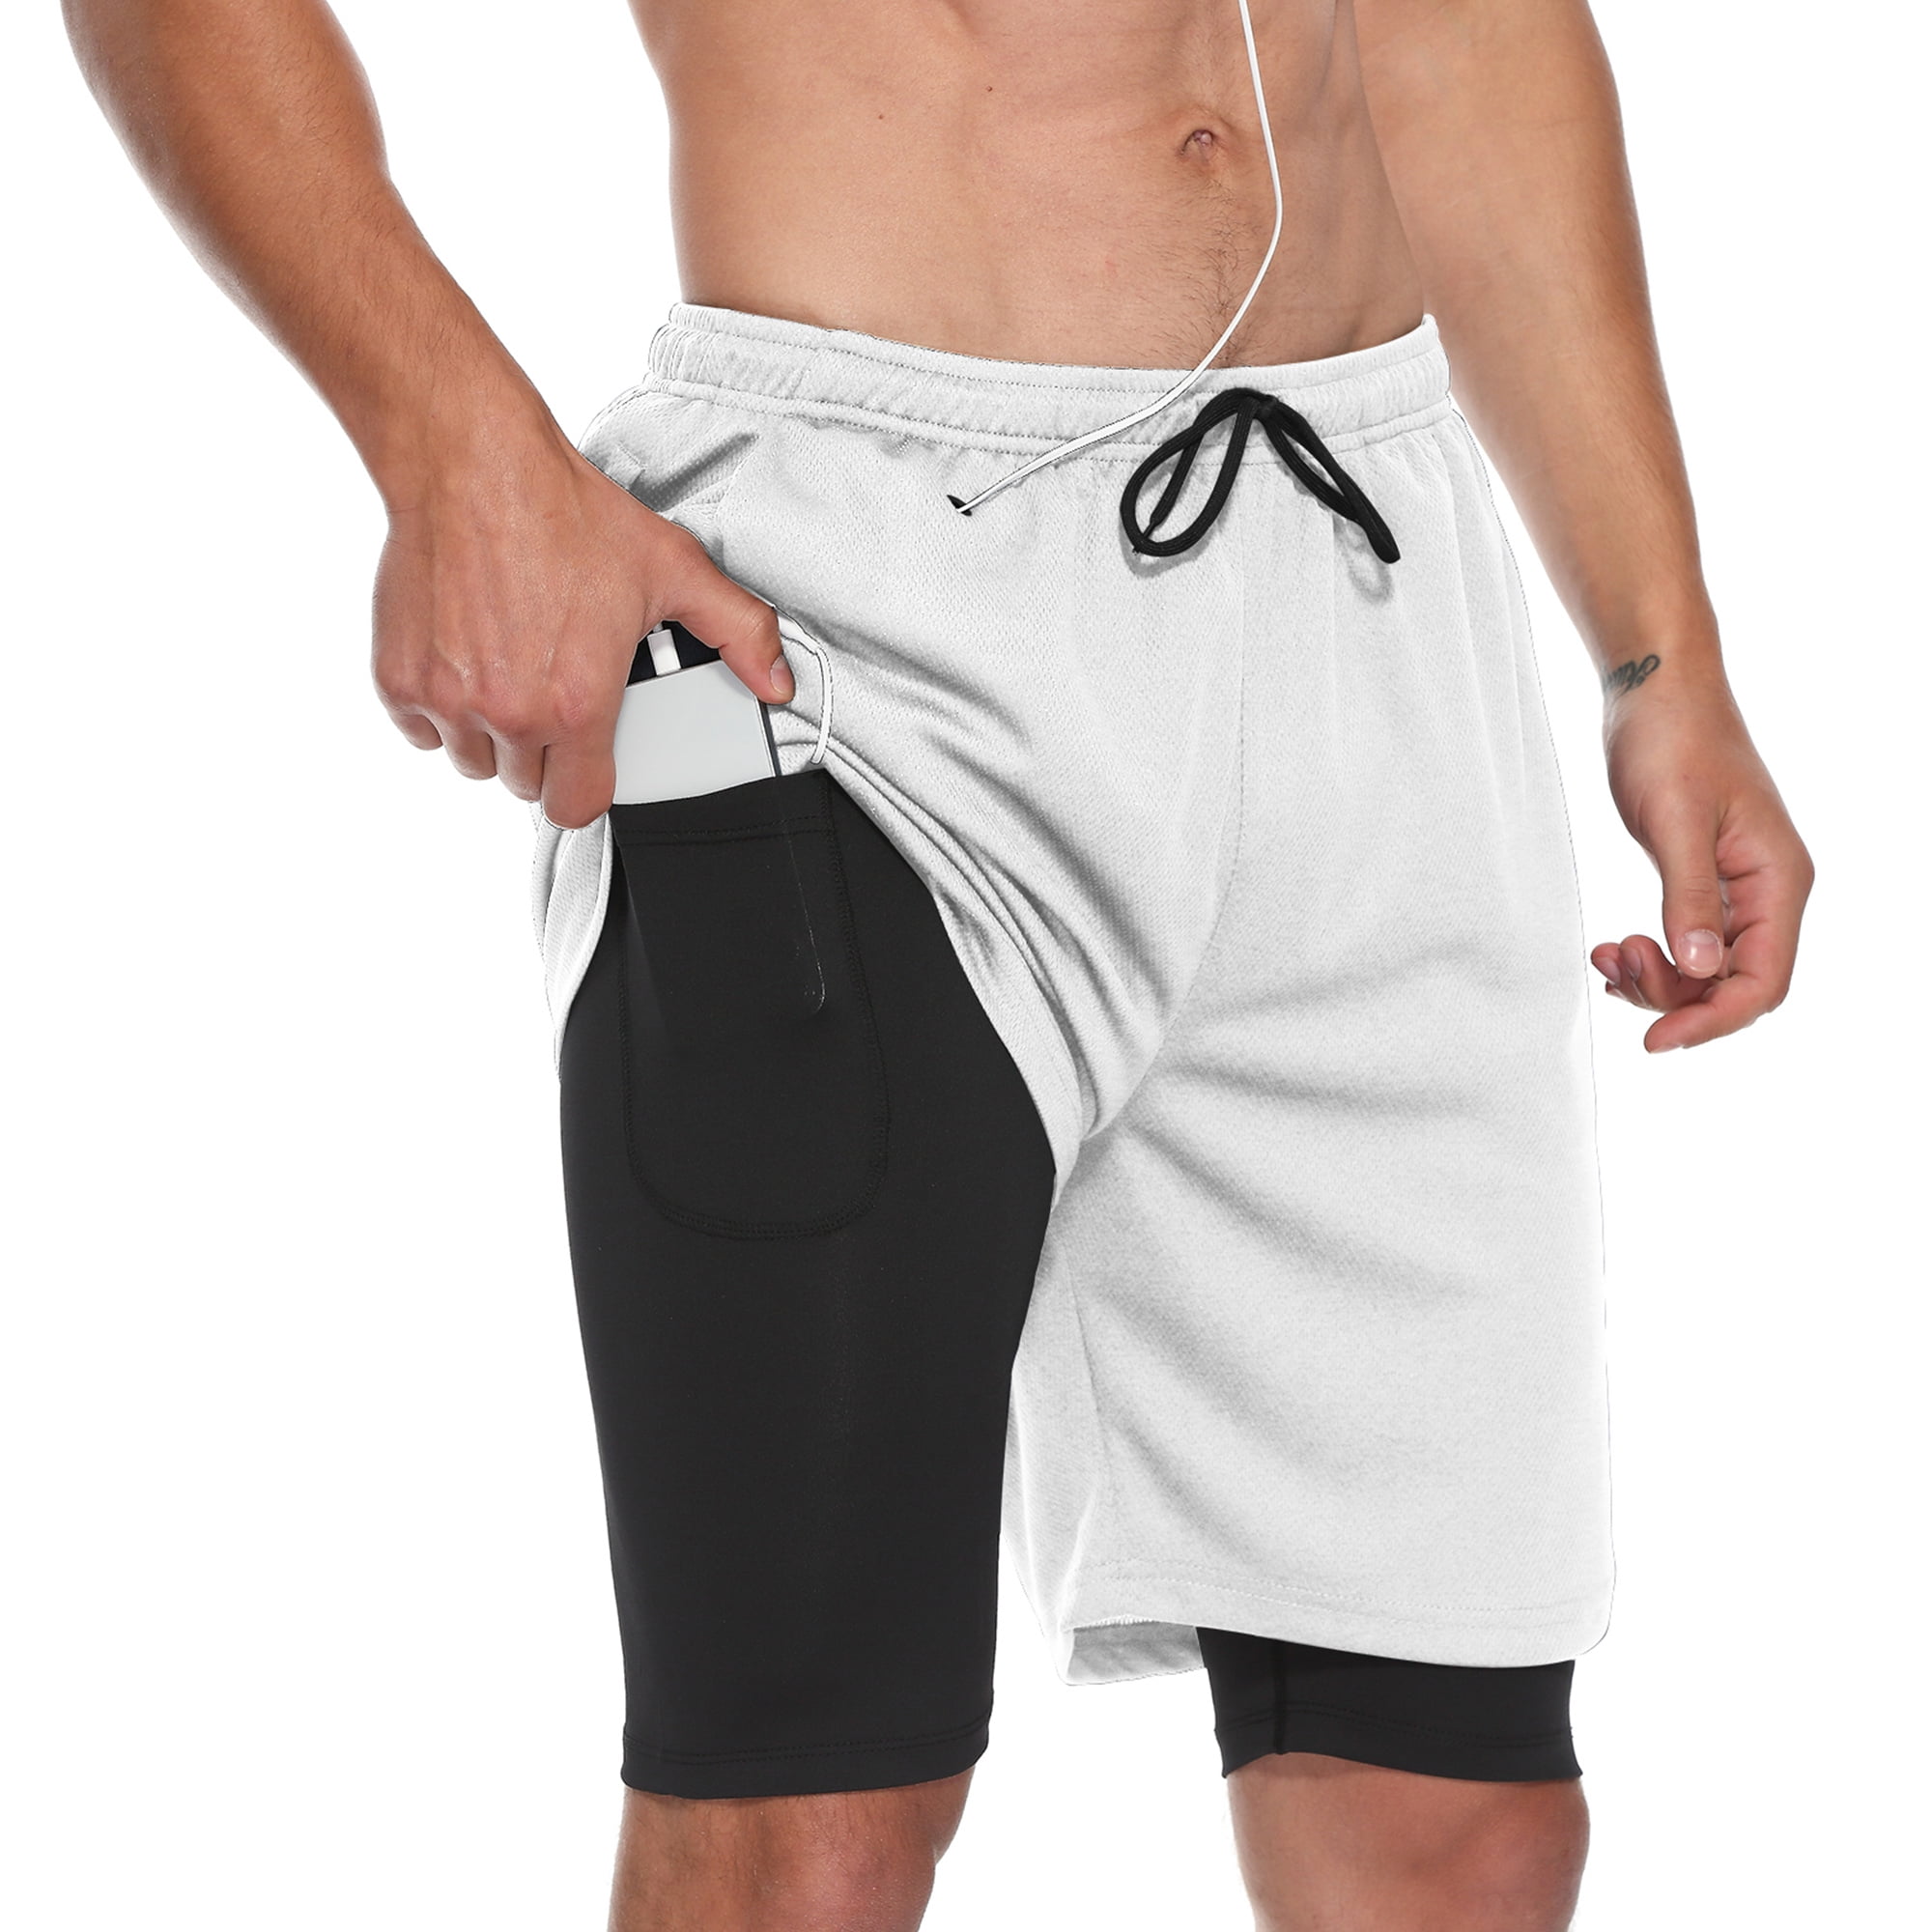 FEDTOSING Mens Running Shorts Quick Dry Lightweight Sports Workout Gym Training Shorts with Zip Pockets 